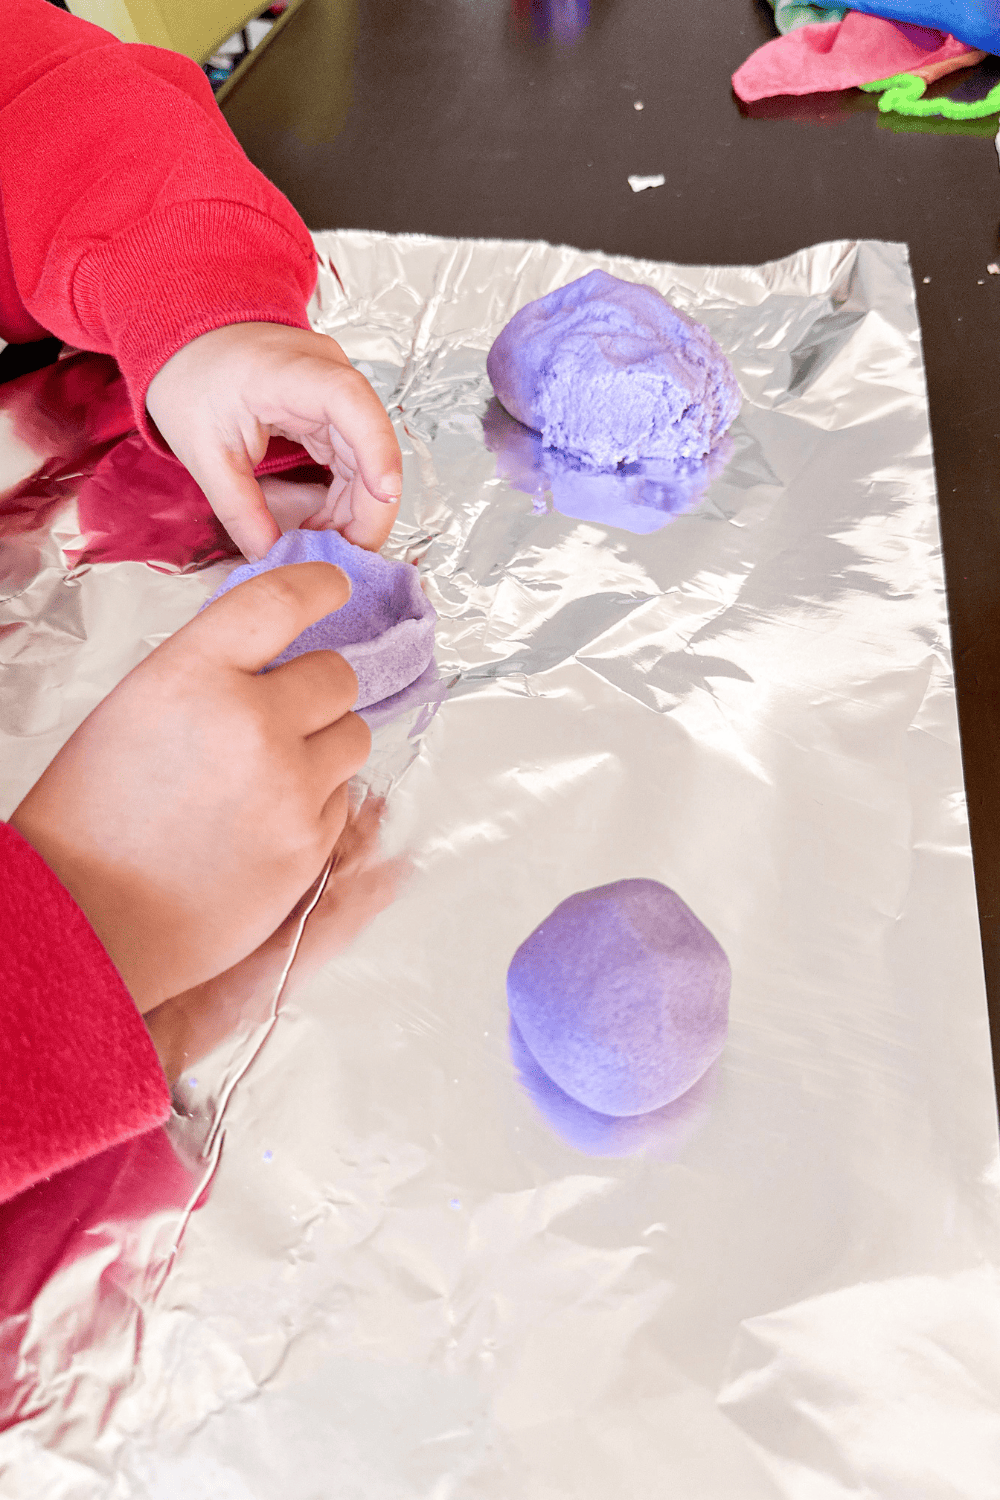 child pinching the edges of a purple salt dough bowl with purple salt dough laying in the background